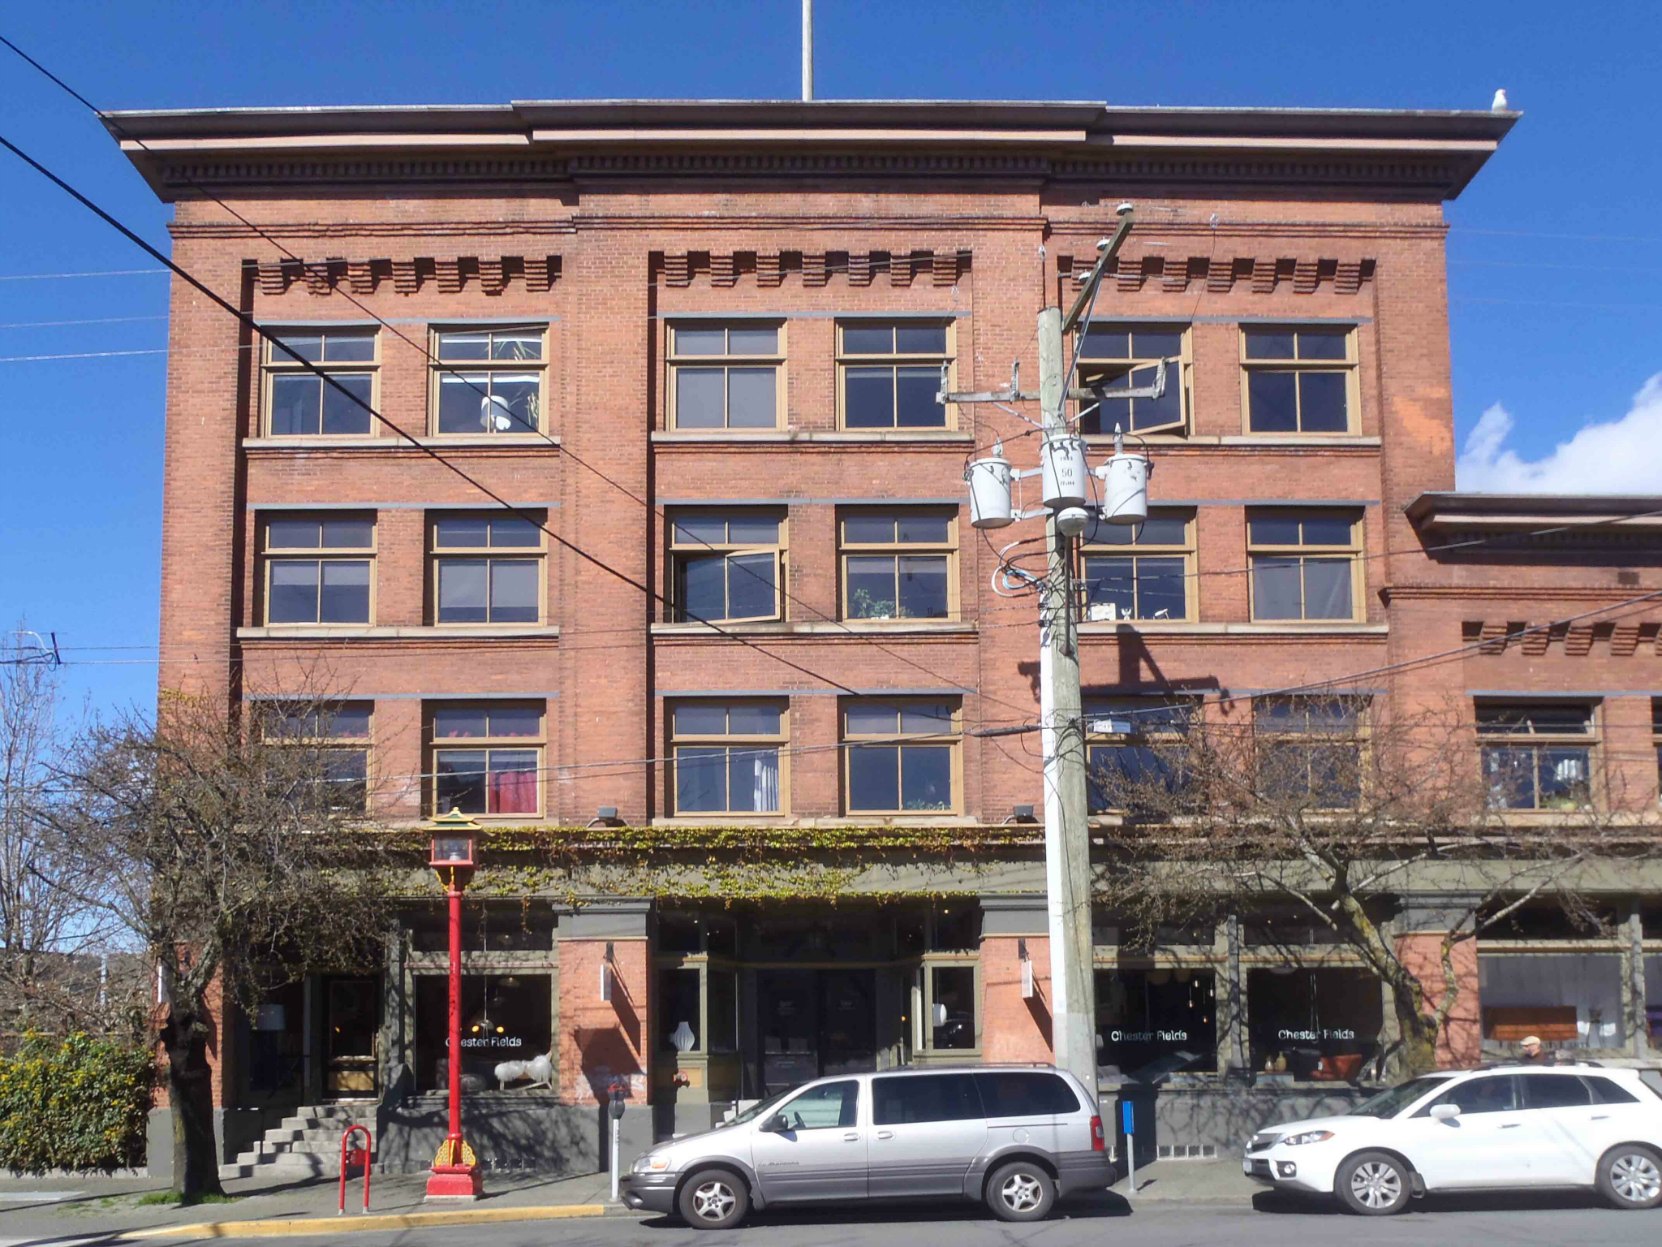 532 Herald Street, built circa 1909 as an office and warehouse for Wilson Brothers Wholesale Grocers.